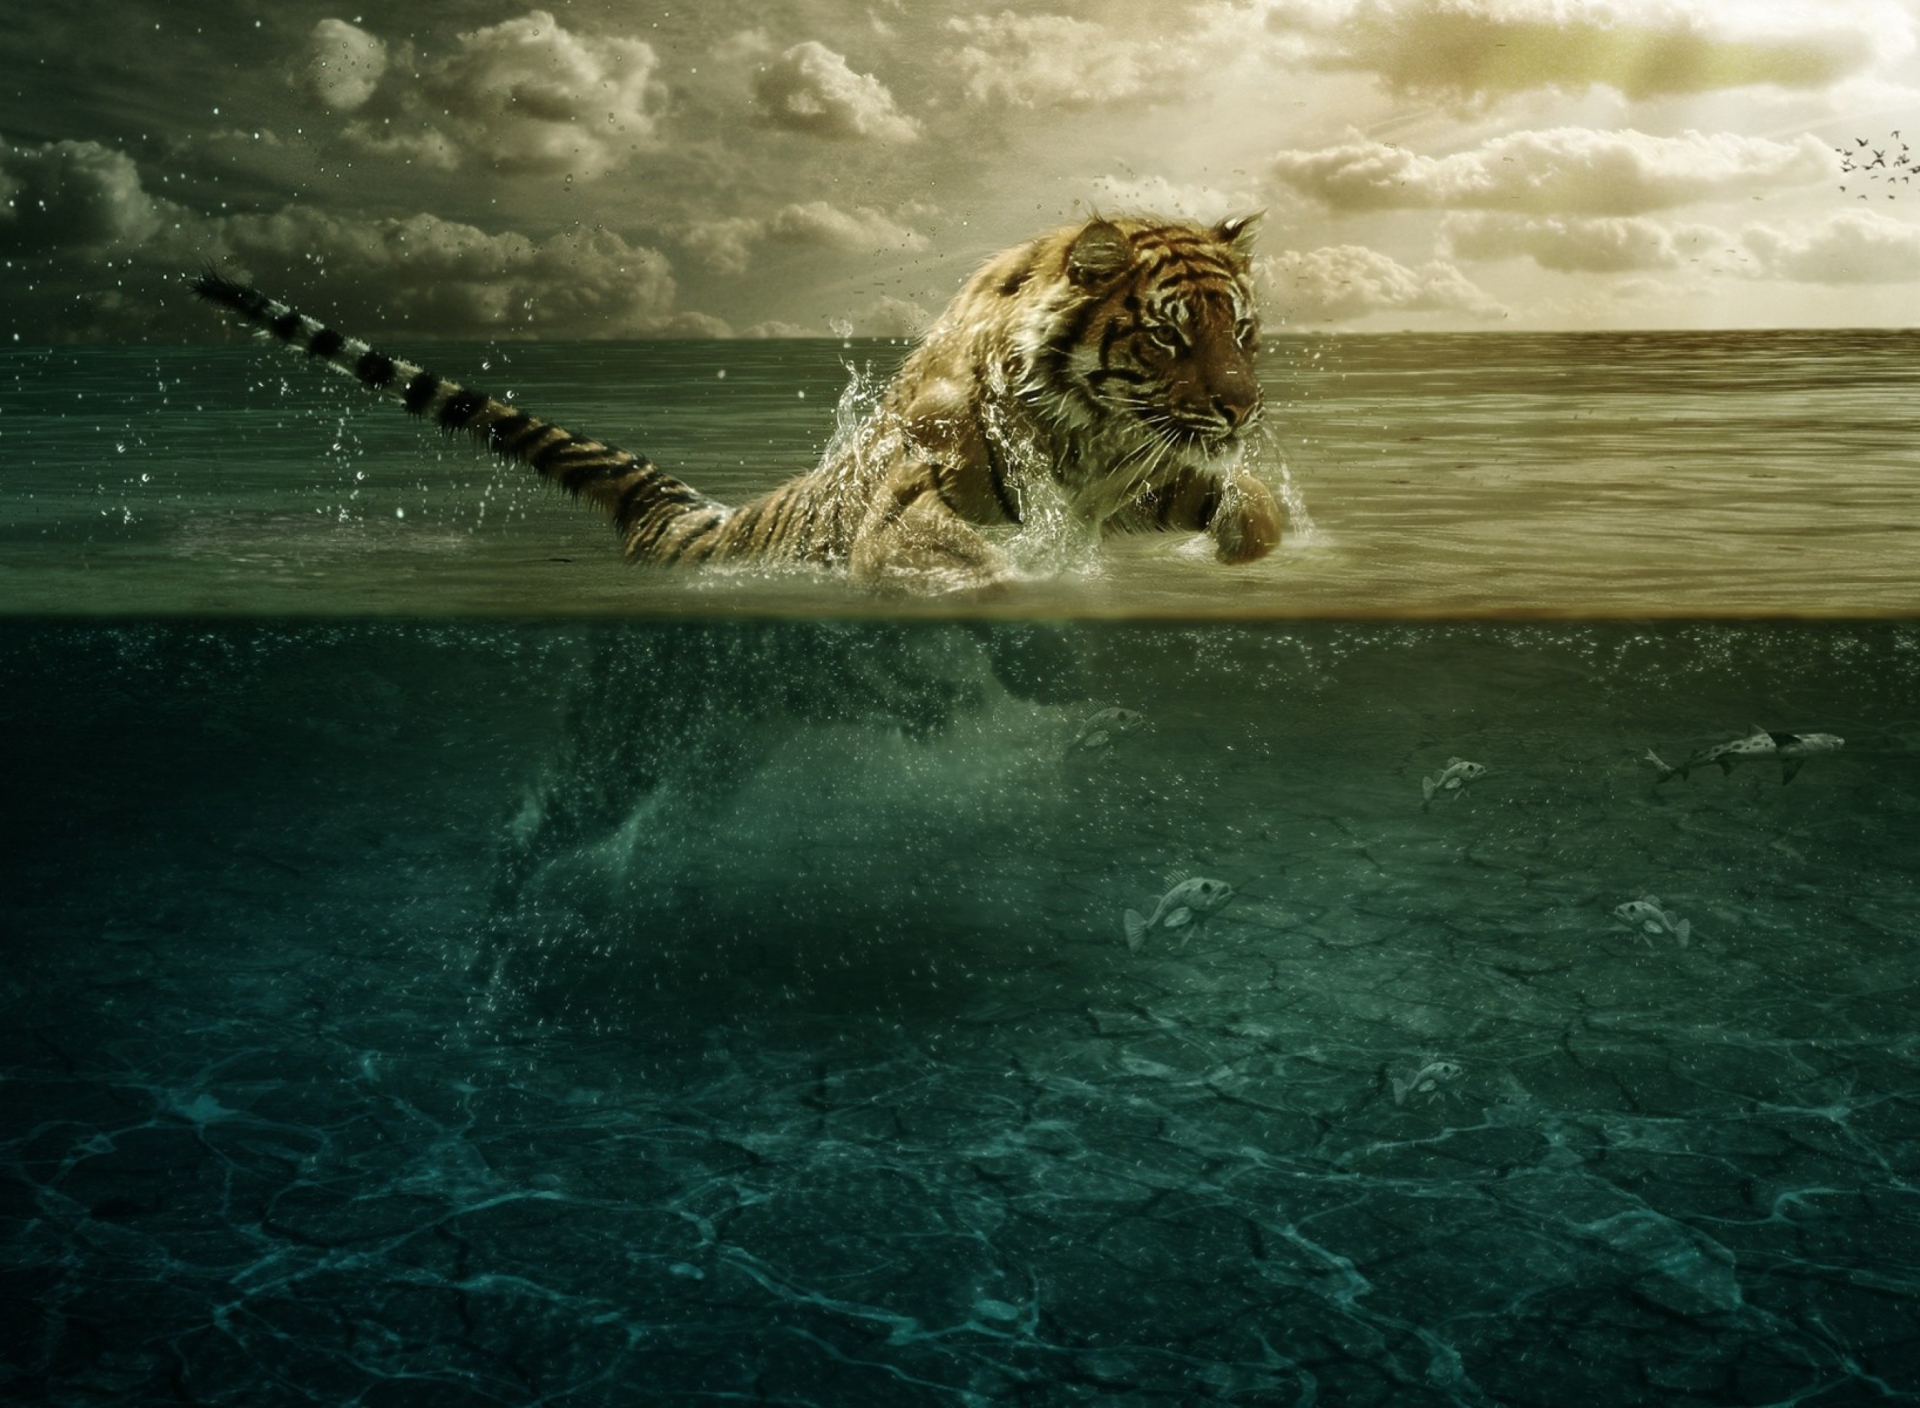 Tiger Jumping Out Of Water wallpaper 1920x1408